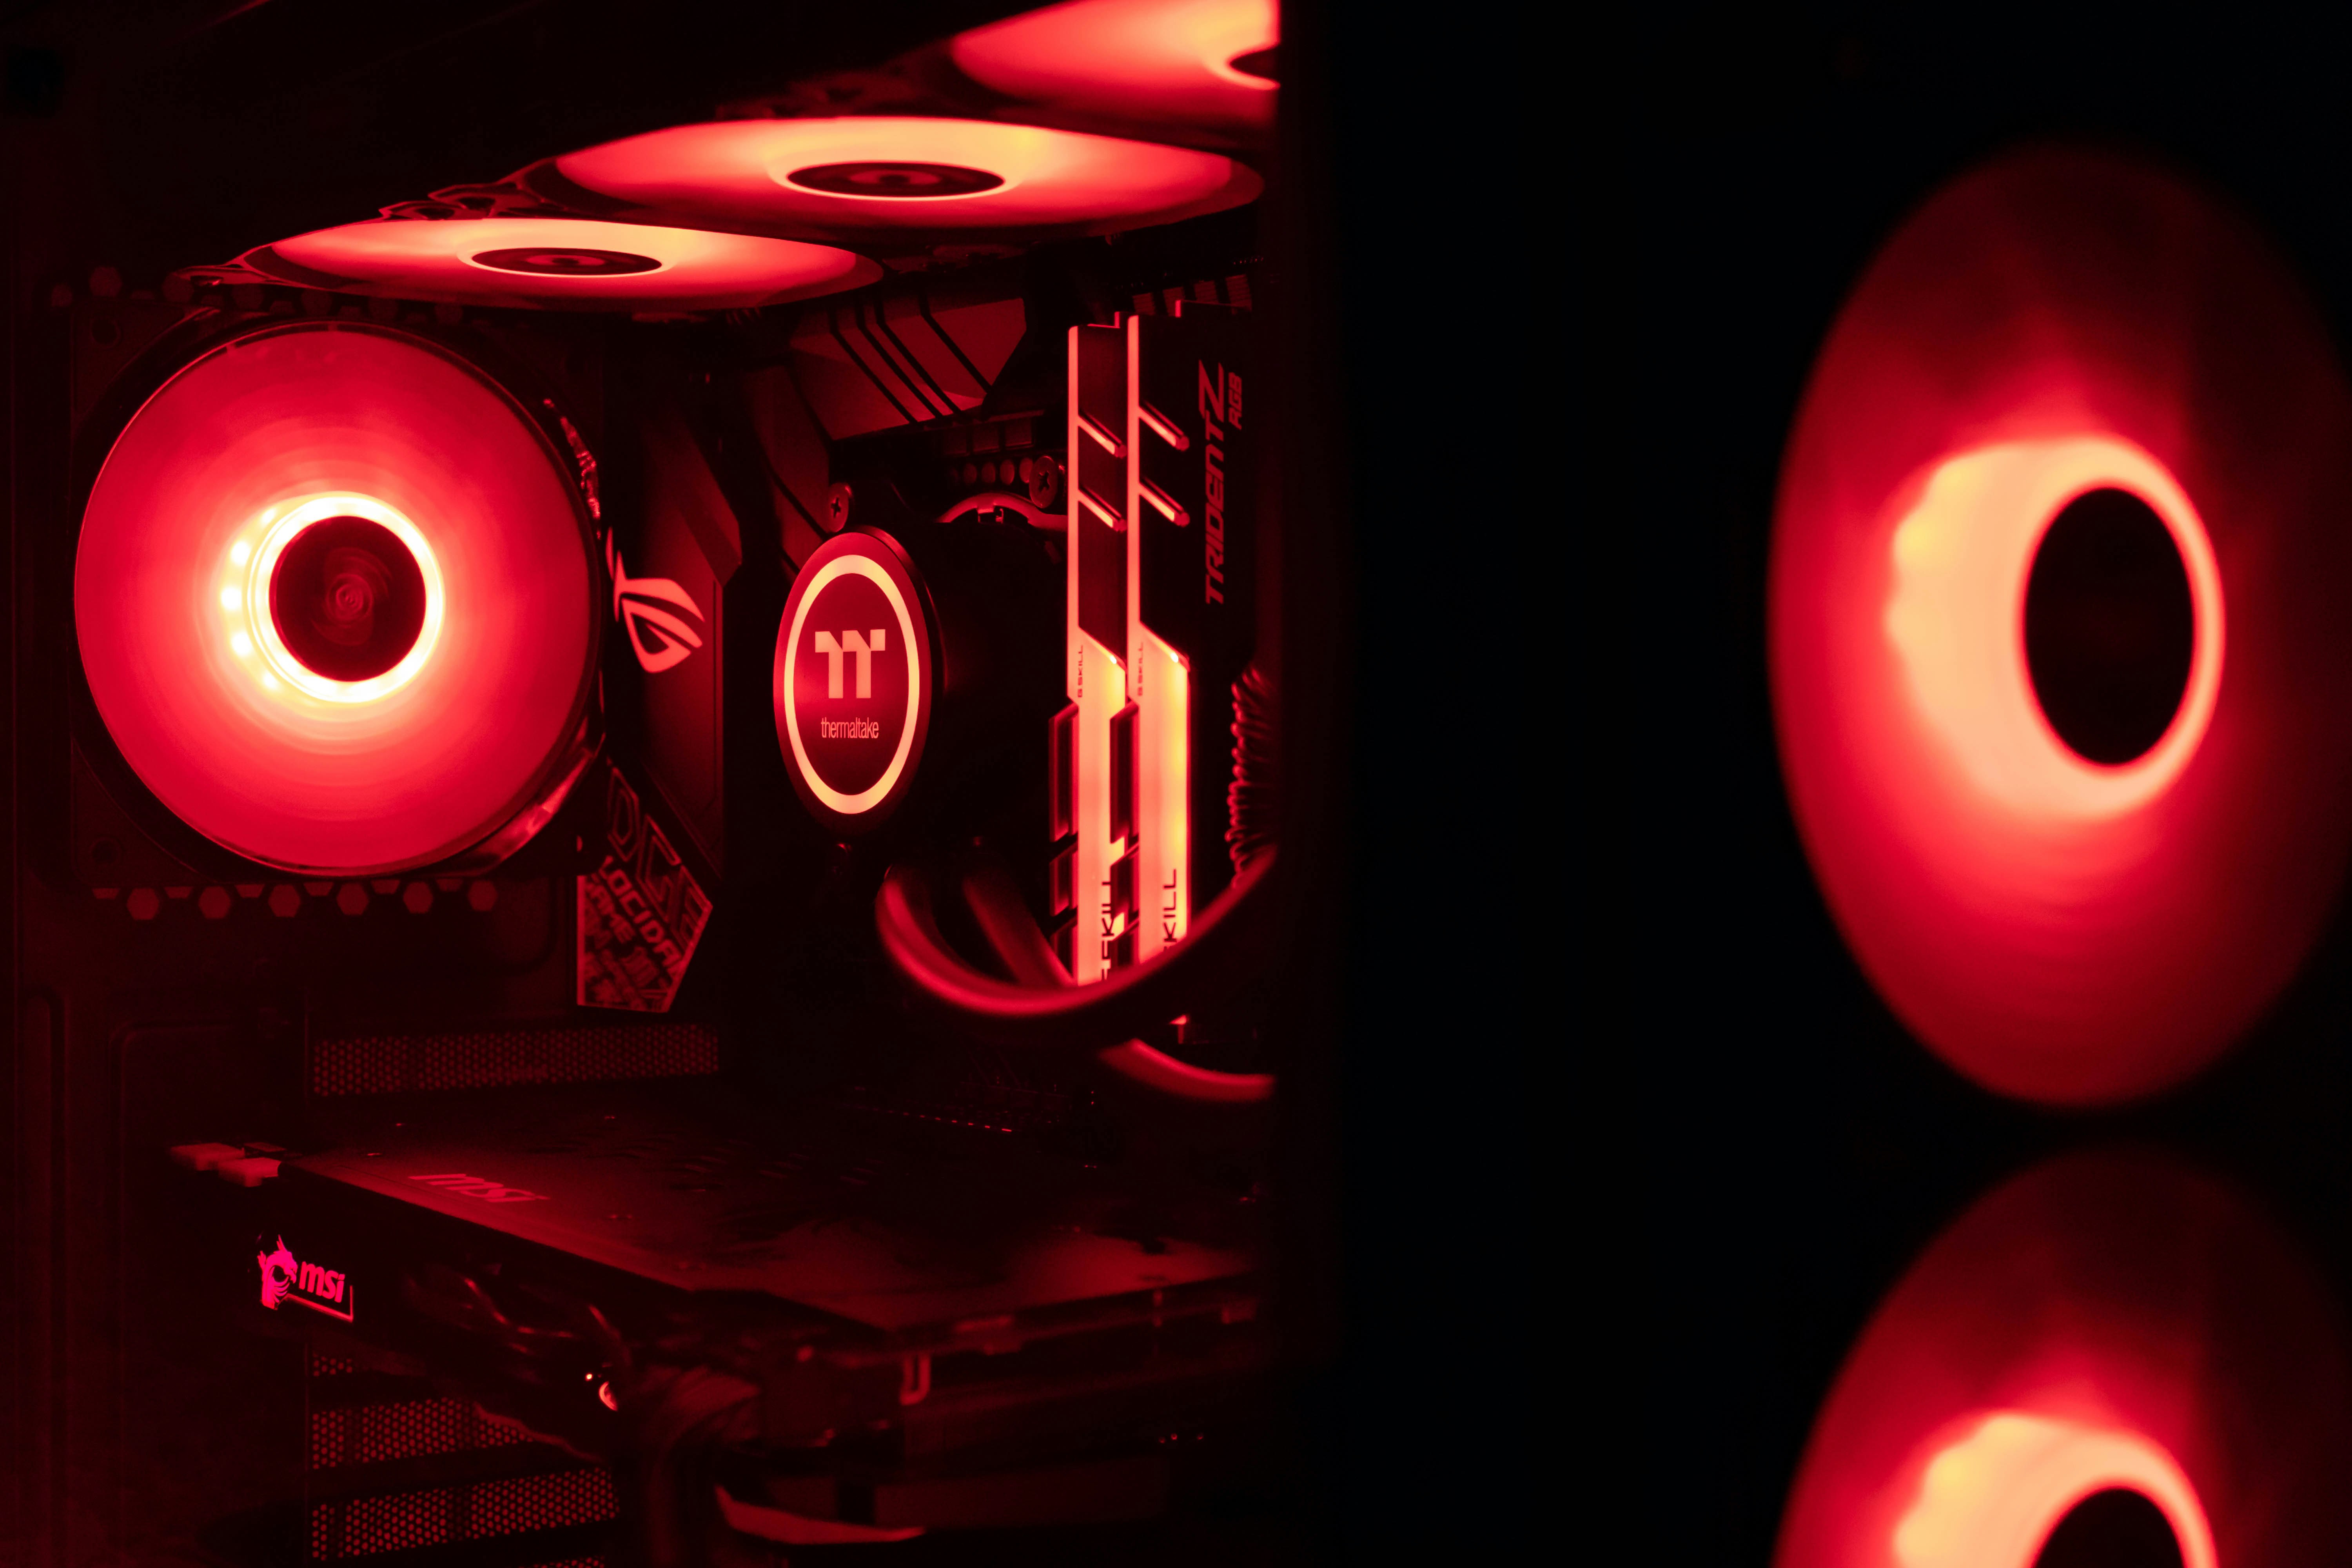 Inside of a professional watercooled gaming/workstation computer with red LED lighting